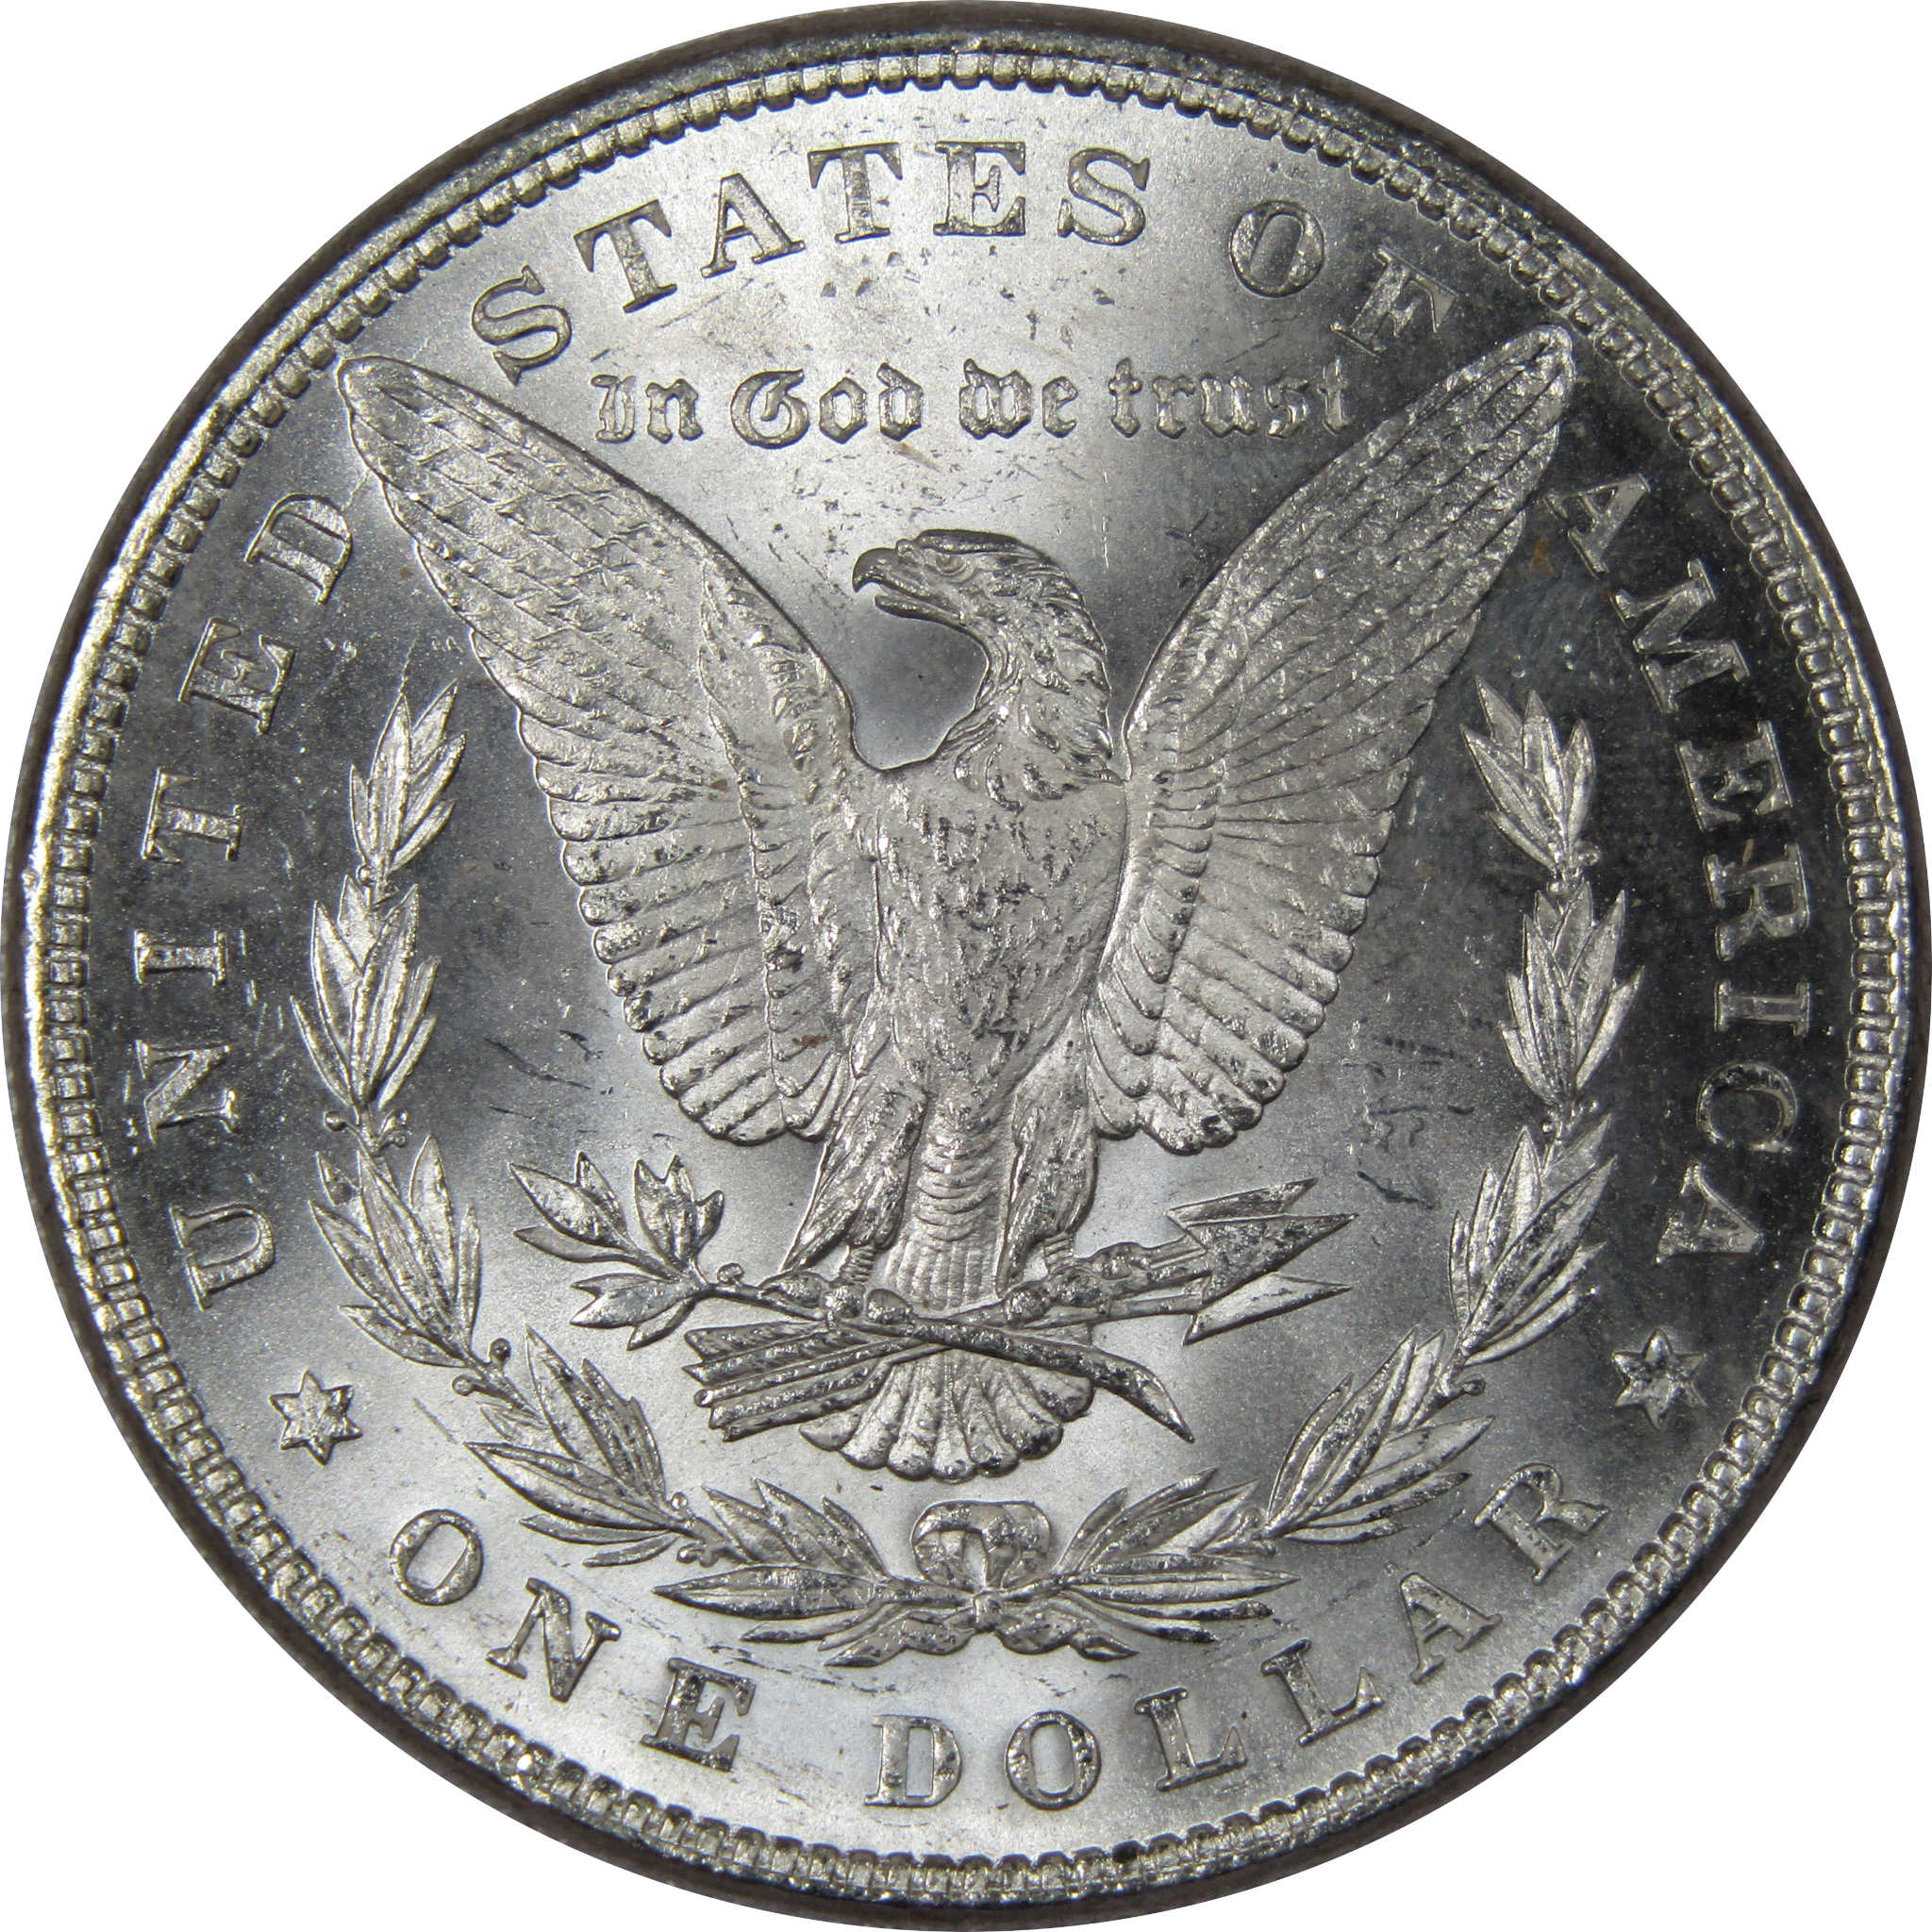 1882 Morgan Dollar BU Uncirculated Mint State 90% Silver SKU:IPC9708 - Morgan coin - Morgan silver dollar - Morgan silver dollar for sale - Profile Coins &amp; Collectibles